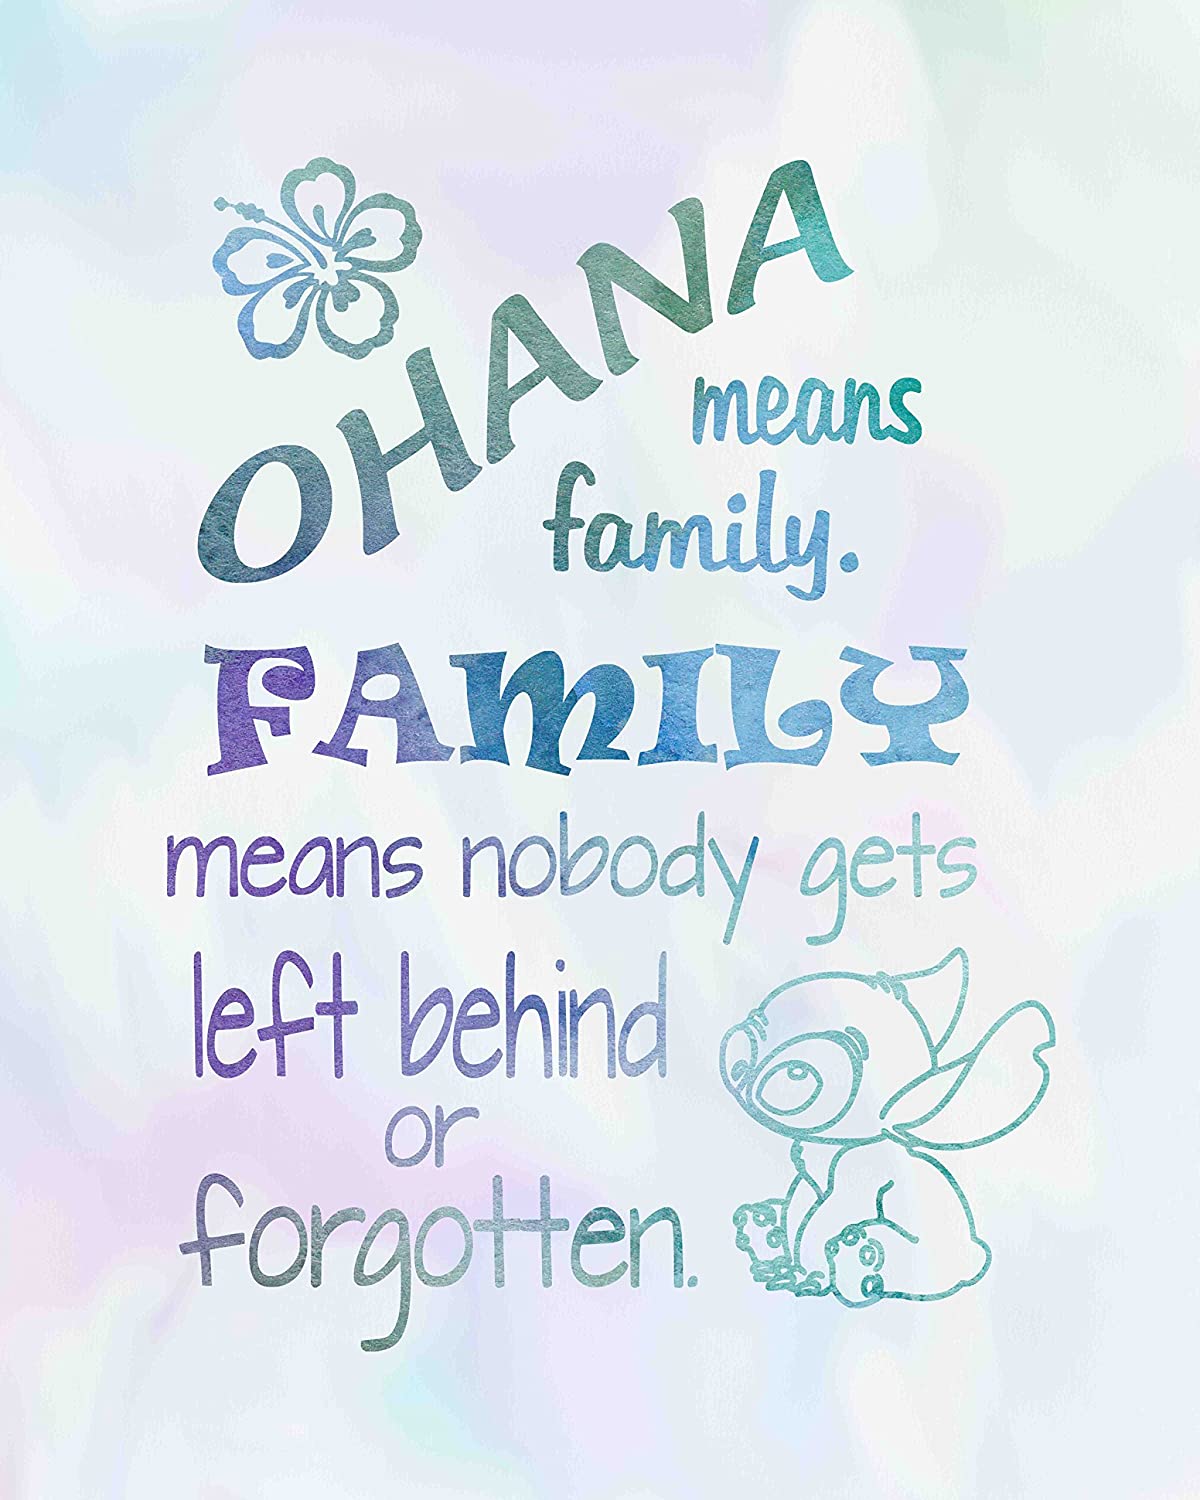 Ohana Means Family by Lilo and Stitch Poster Print Photo Quality in USA Inspired Art Print -Frame not